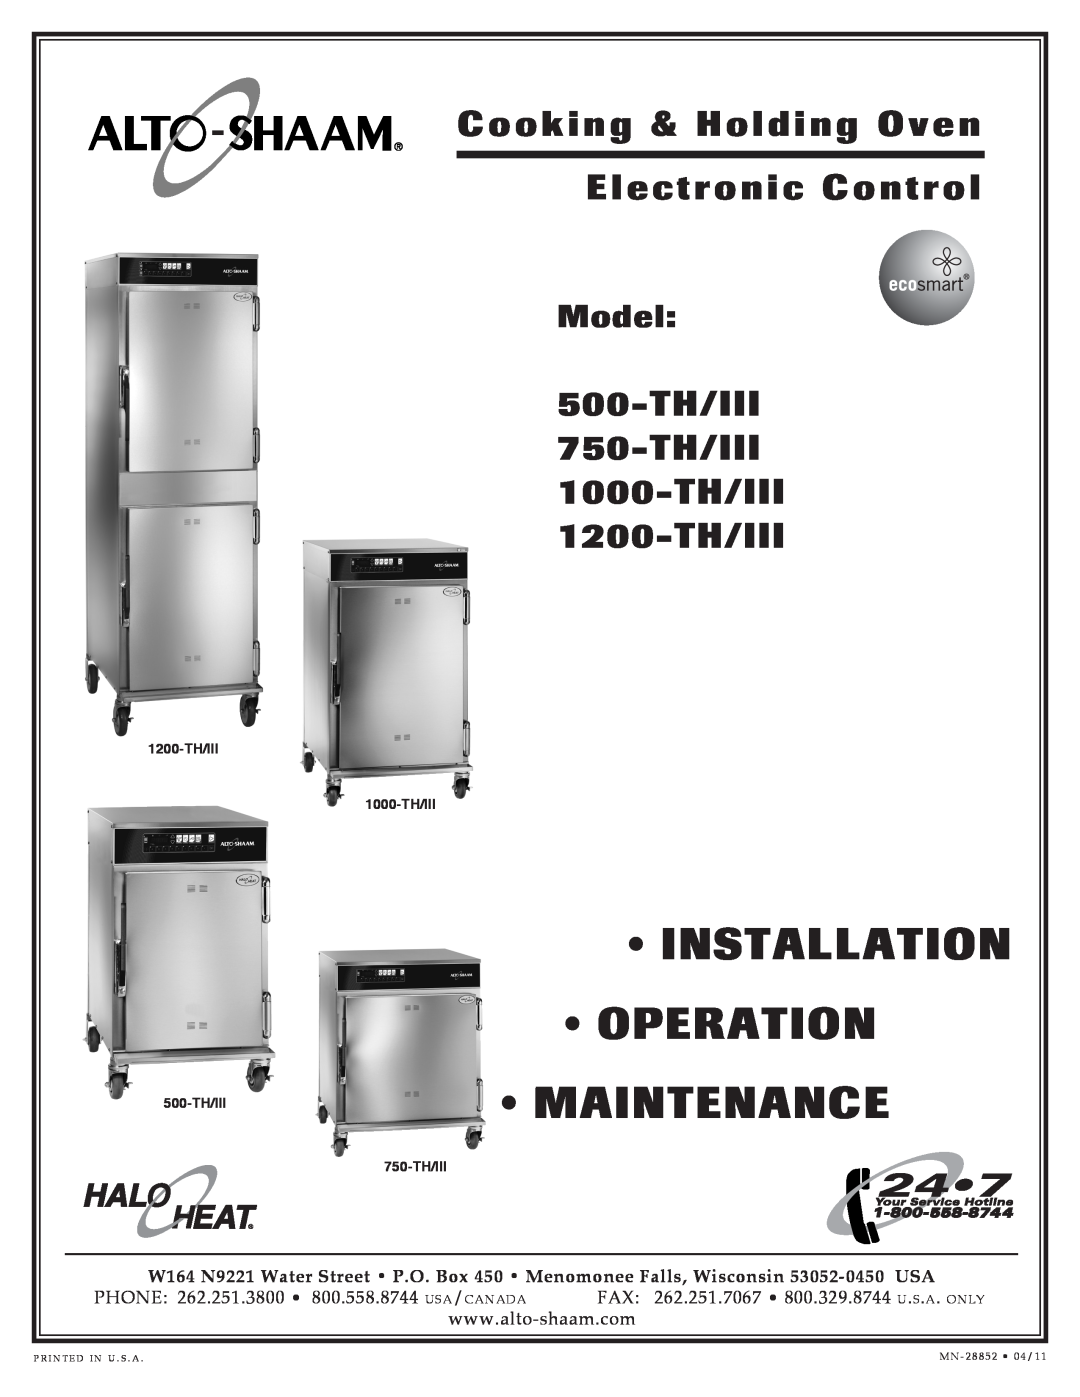 Alto-Shaam 750-TH/III warranty 750- TH, Low Temperature Electronic Cook & Hold Oven, Item No, Factory Installed Options 